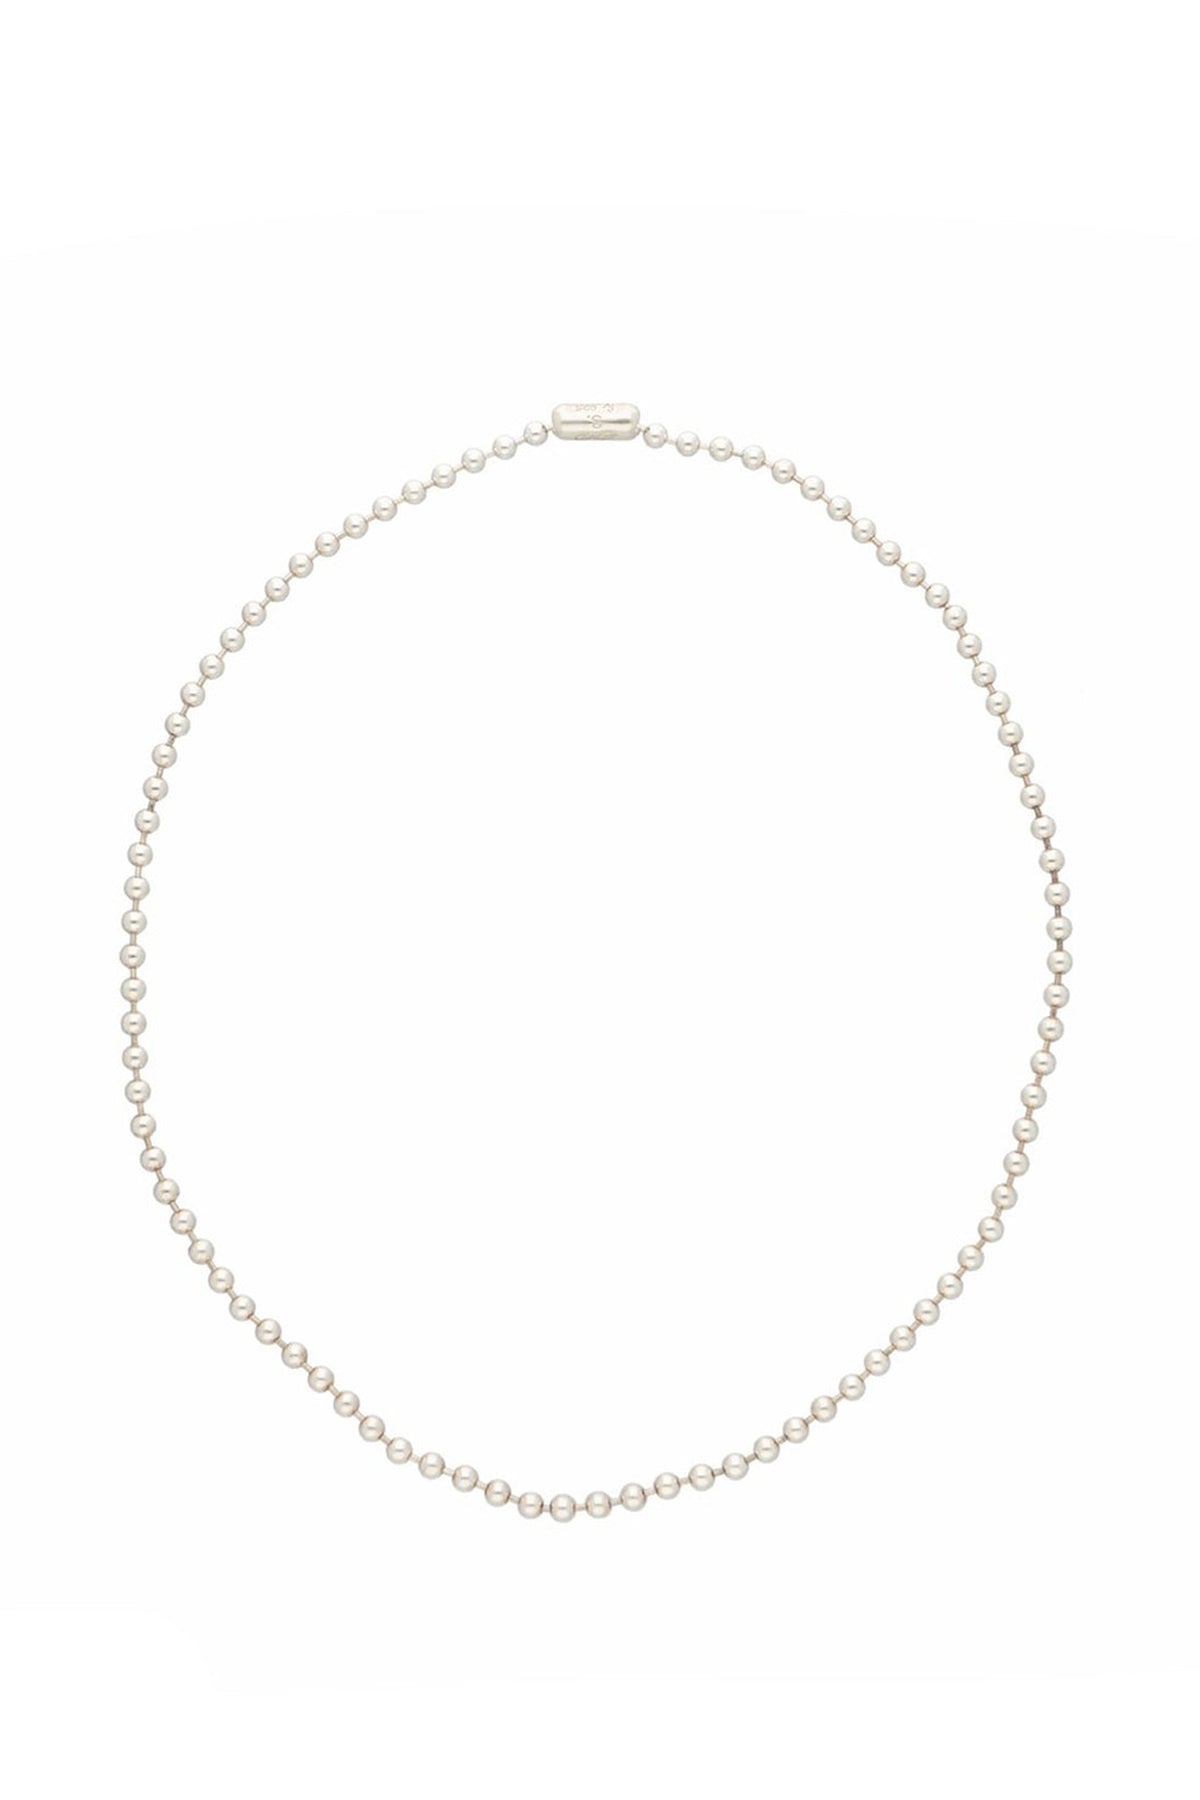 BALL CHAIN NECKLACE-S-REGULAR / SIL